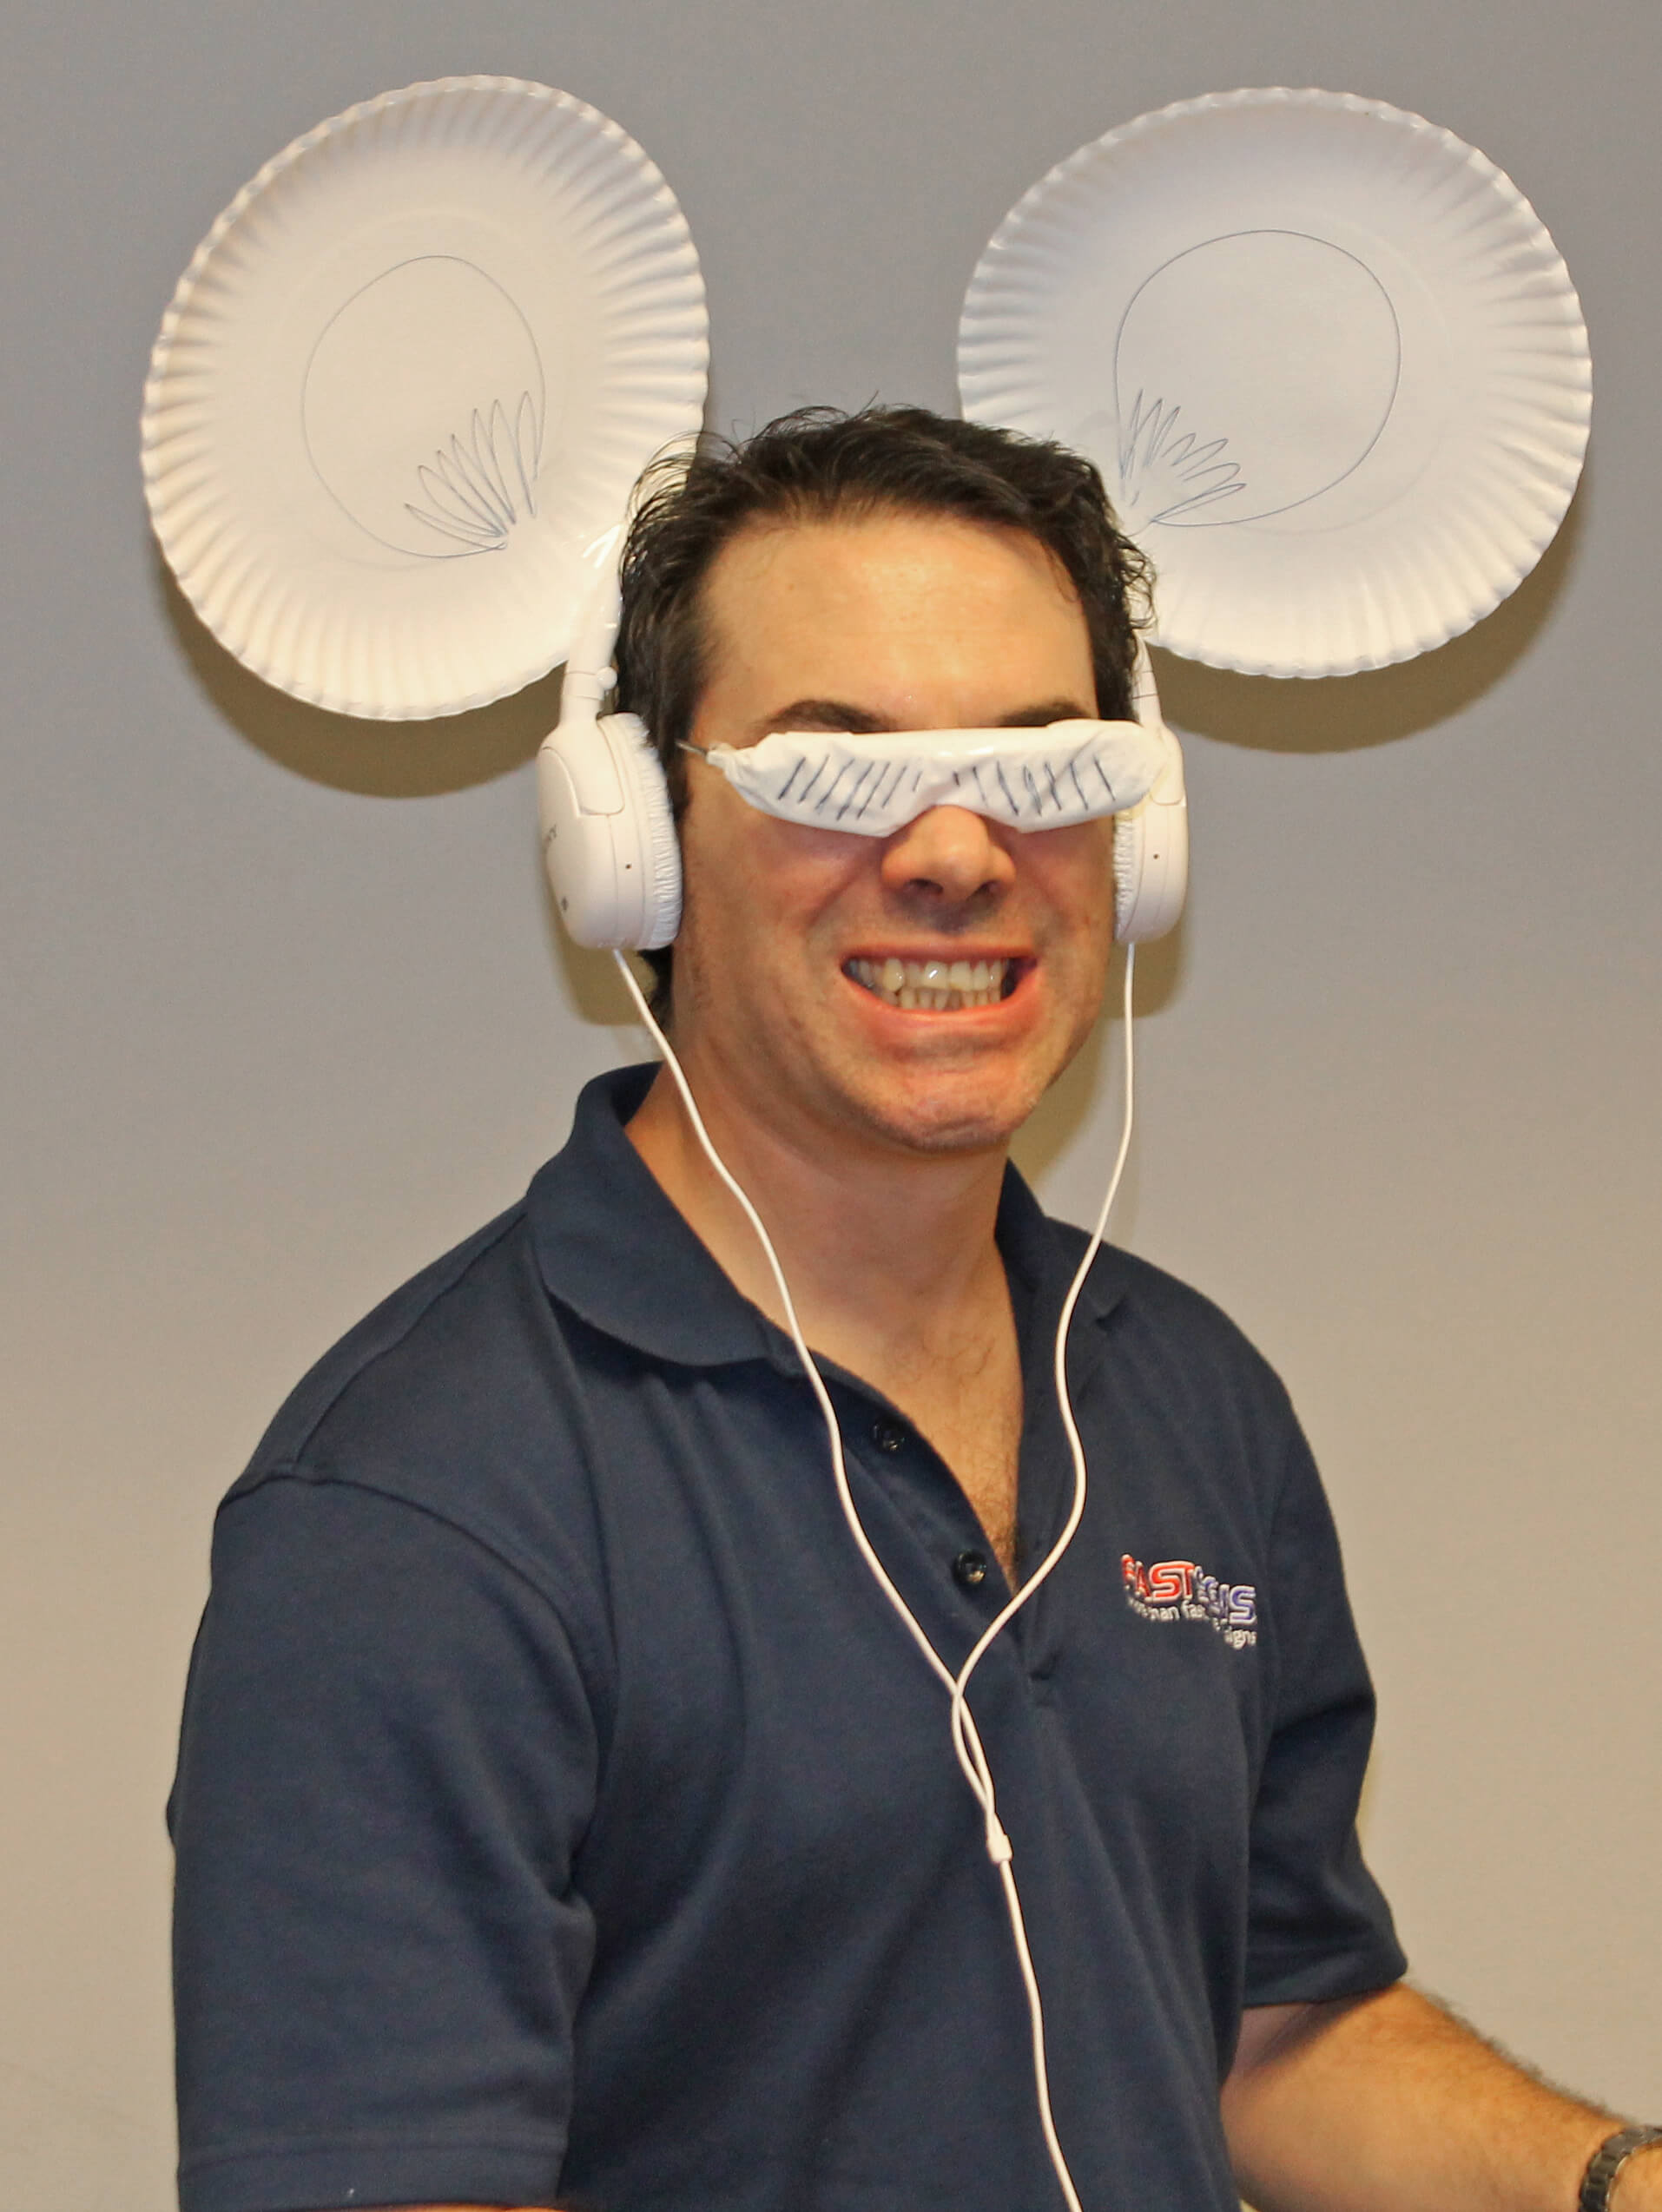 man smiling wearing headphones attached with paper plates and sunglasses 